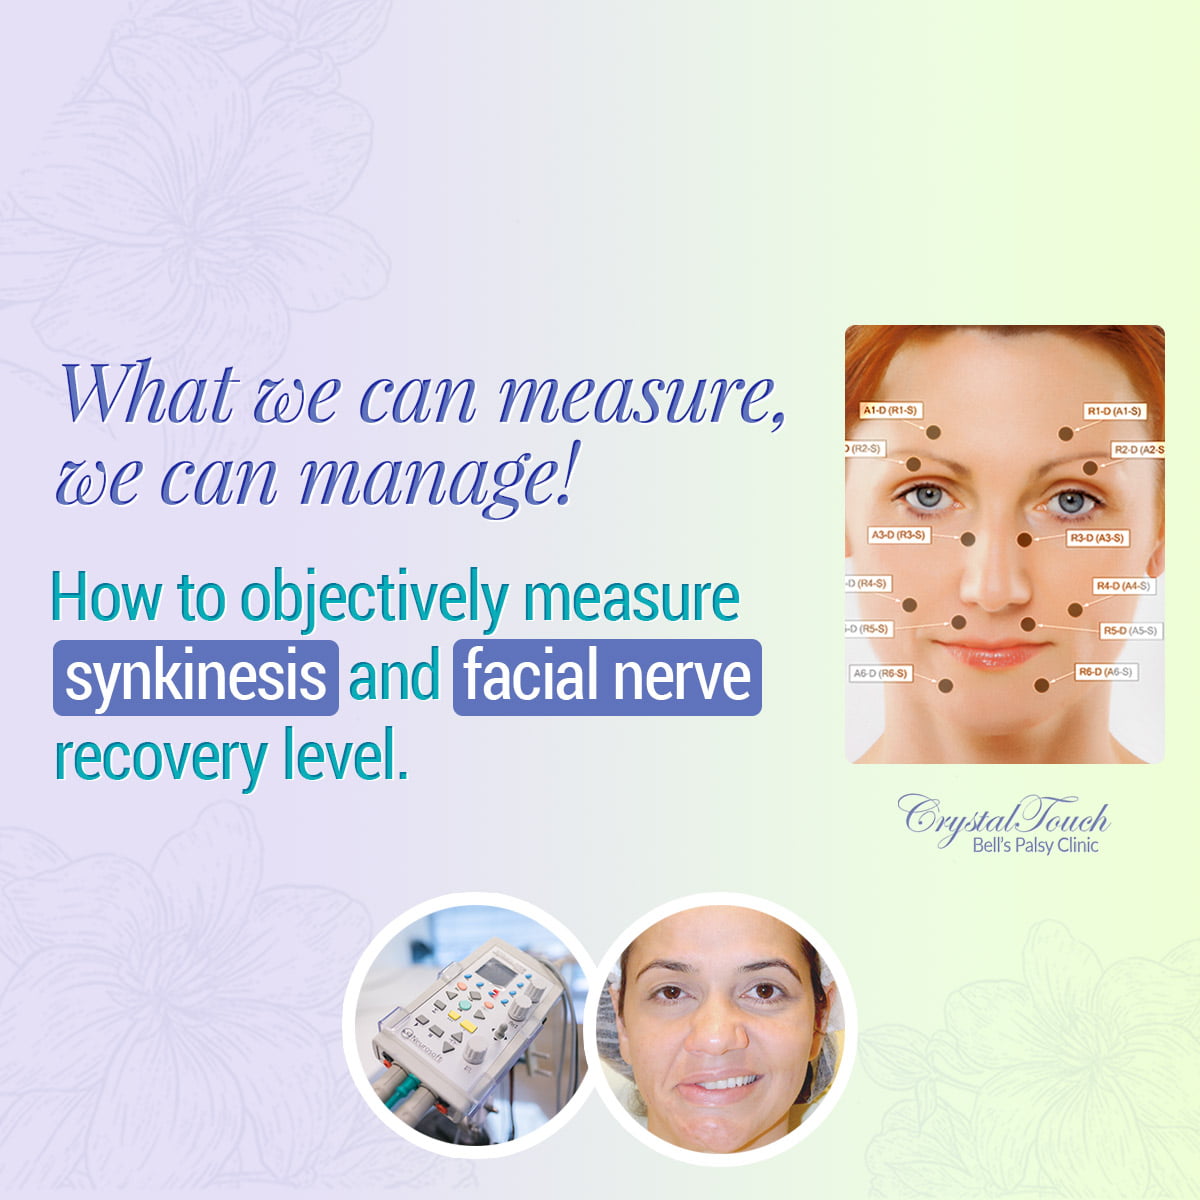 Measuring synkinesis and facial nerve recovery level